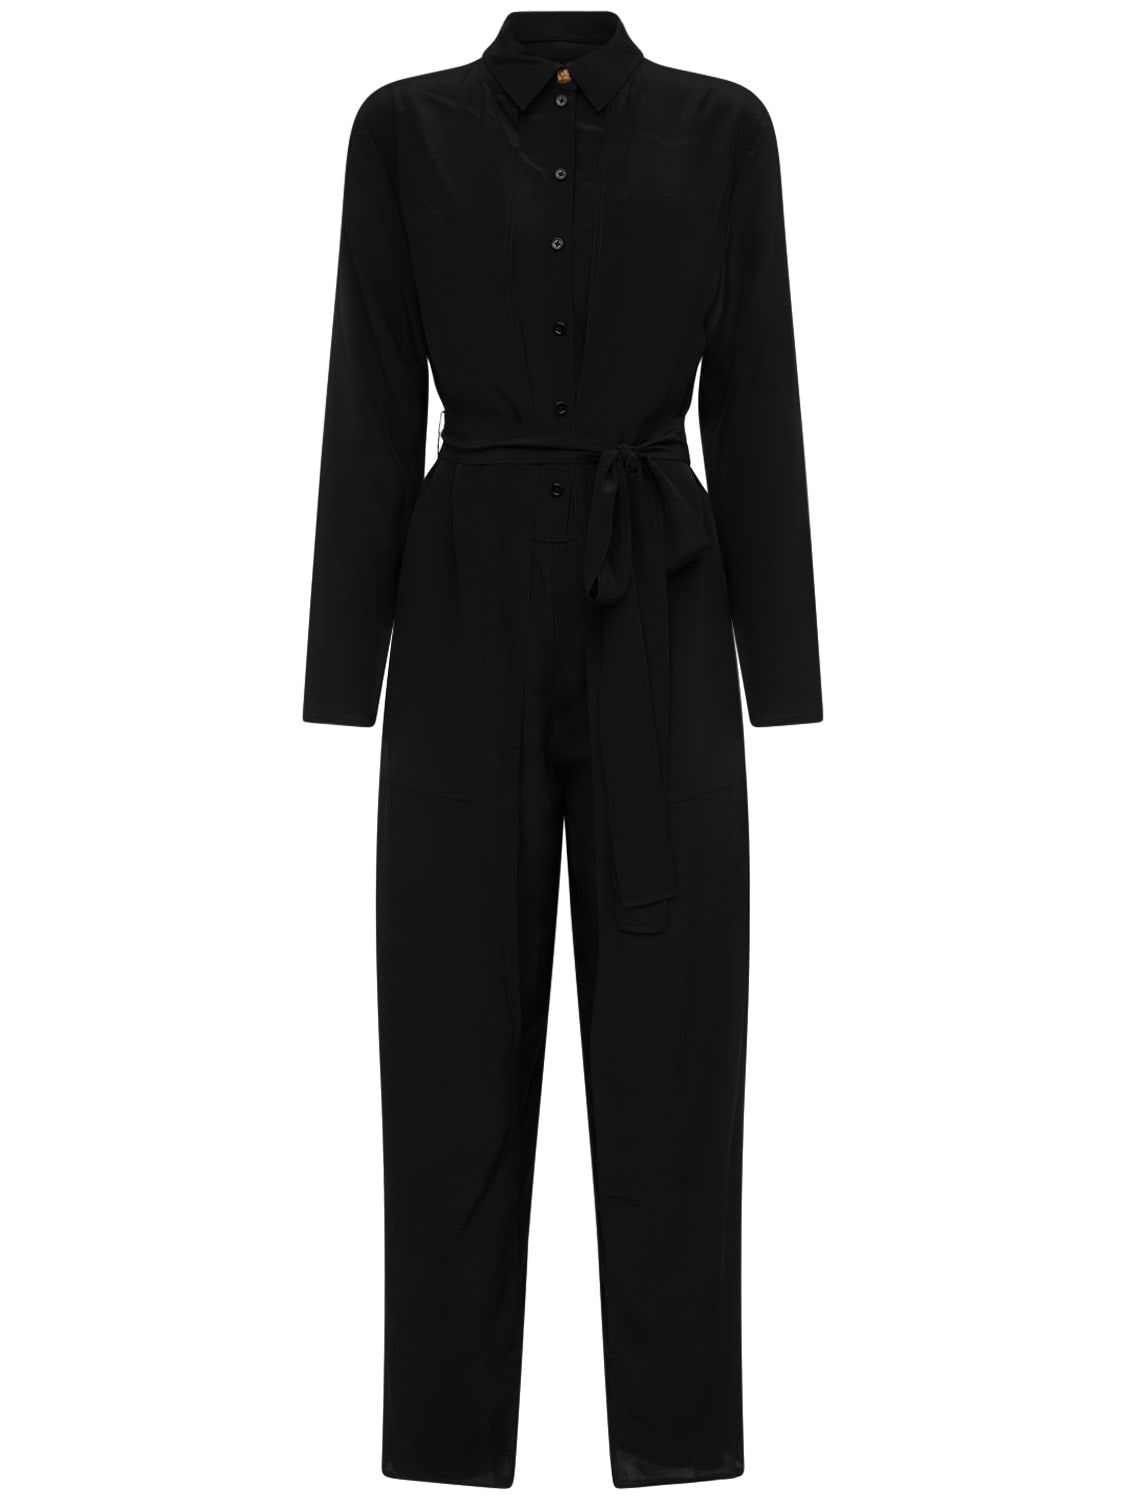 MARC JACOBS (THE) Layered Silk Jumpsuit